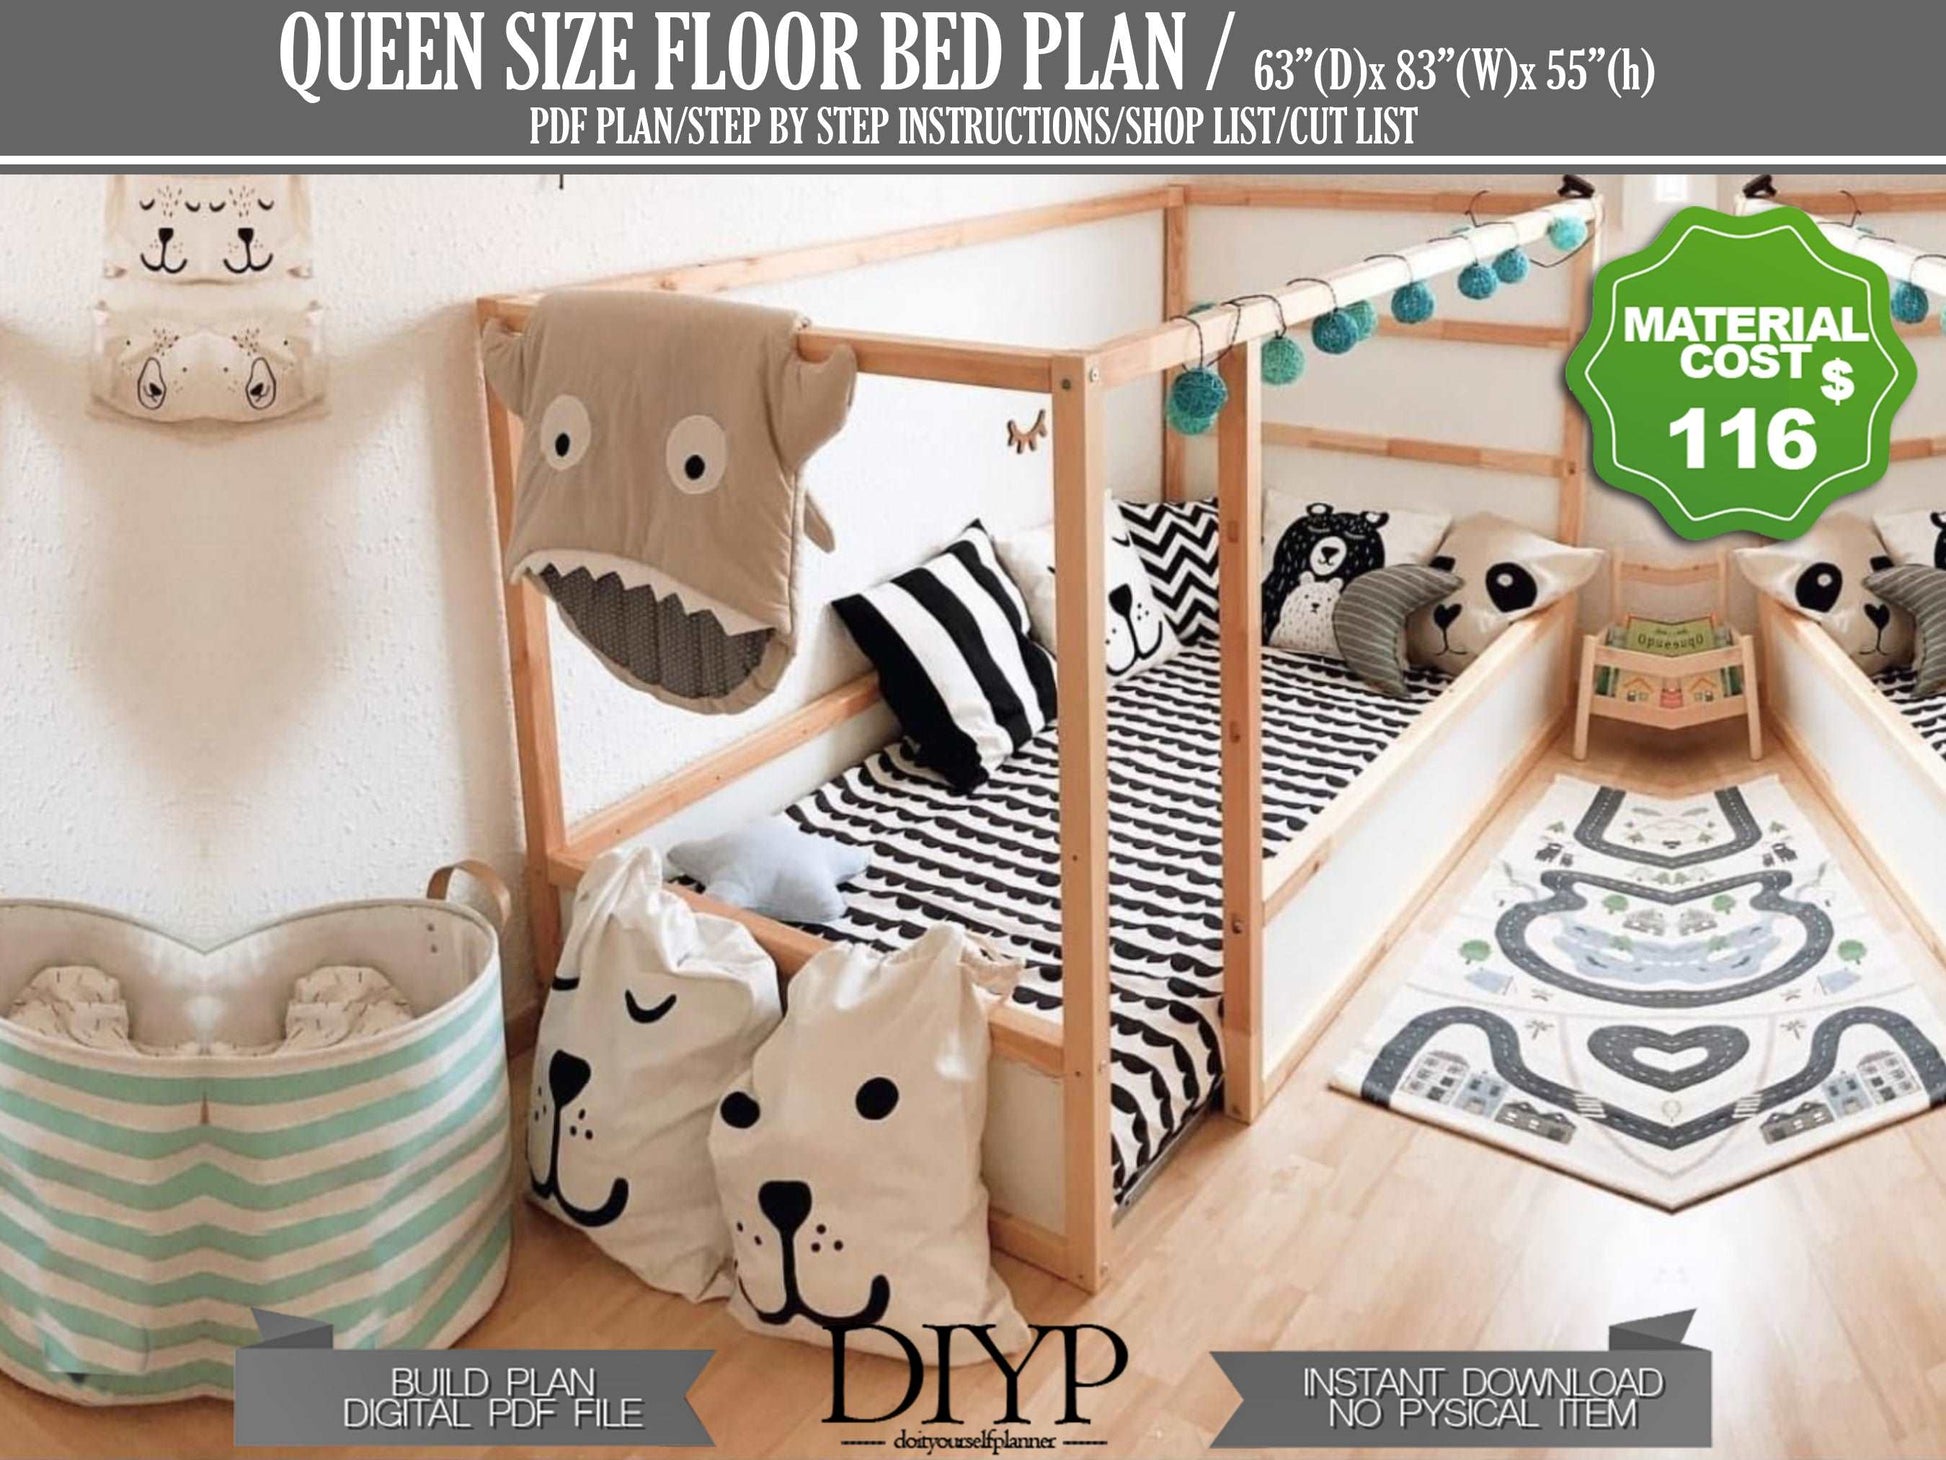 Create Your Dream Queen Size Floor Bed with Our Comprehensive DIY Frame Plan | Step-by-Step Build Animation Included!